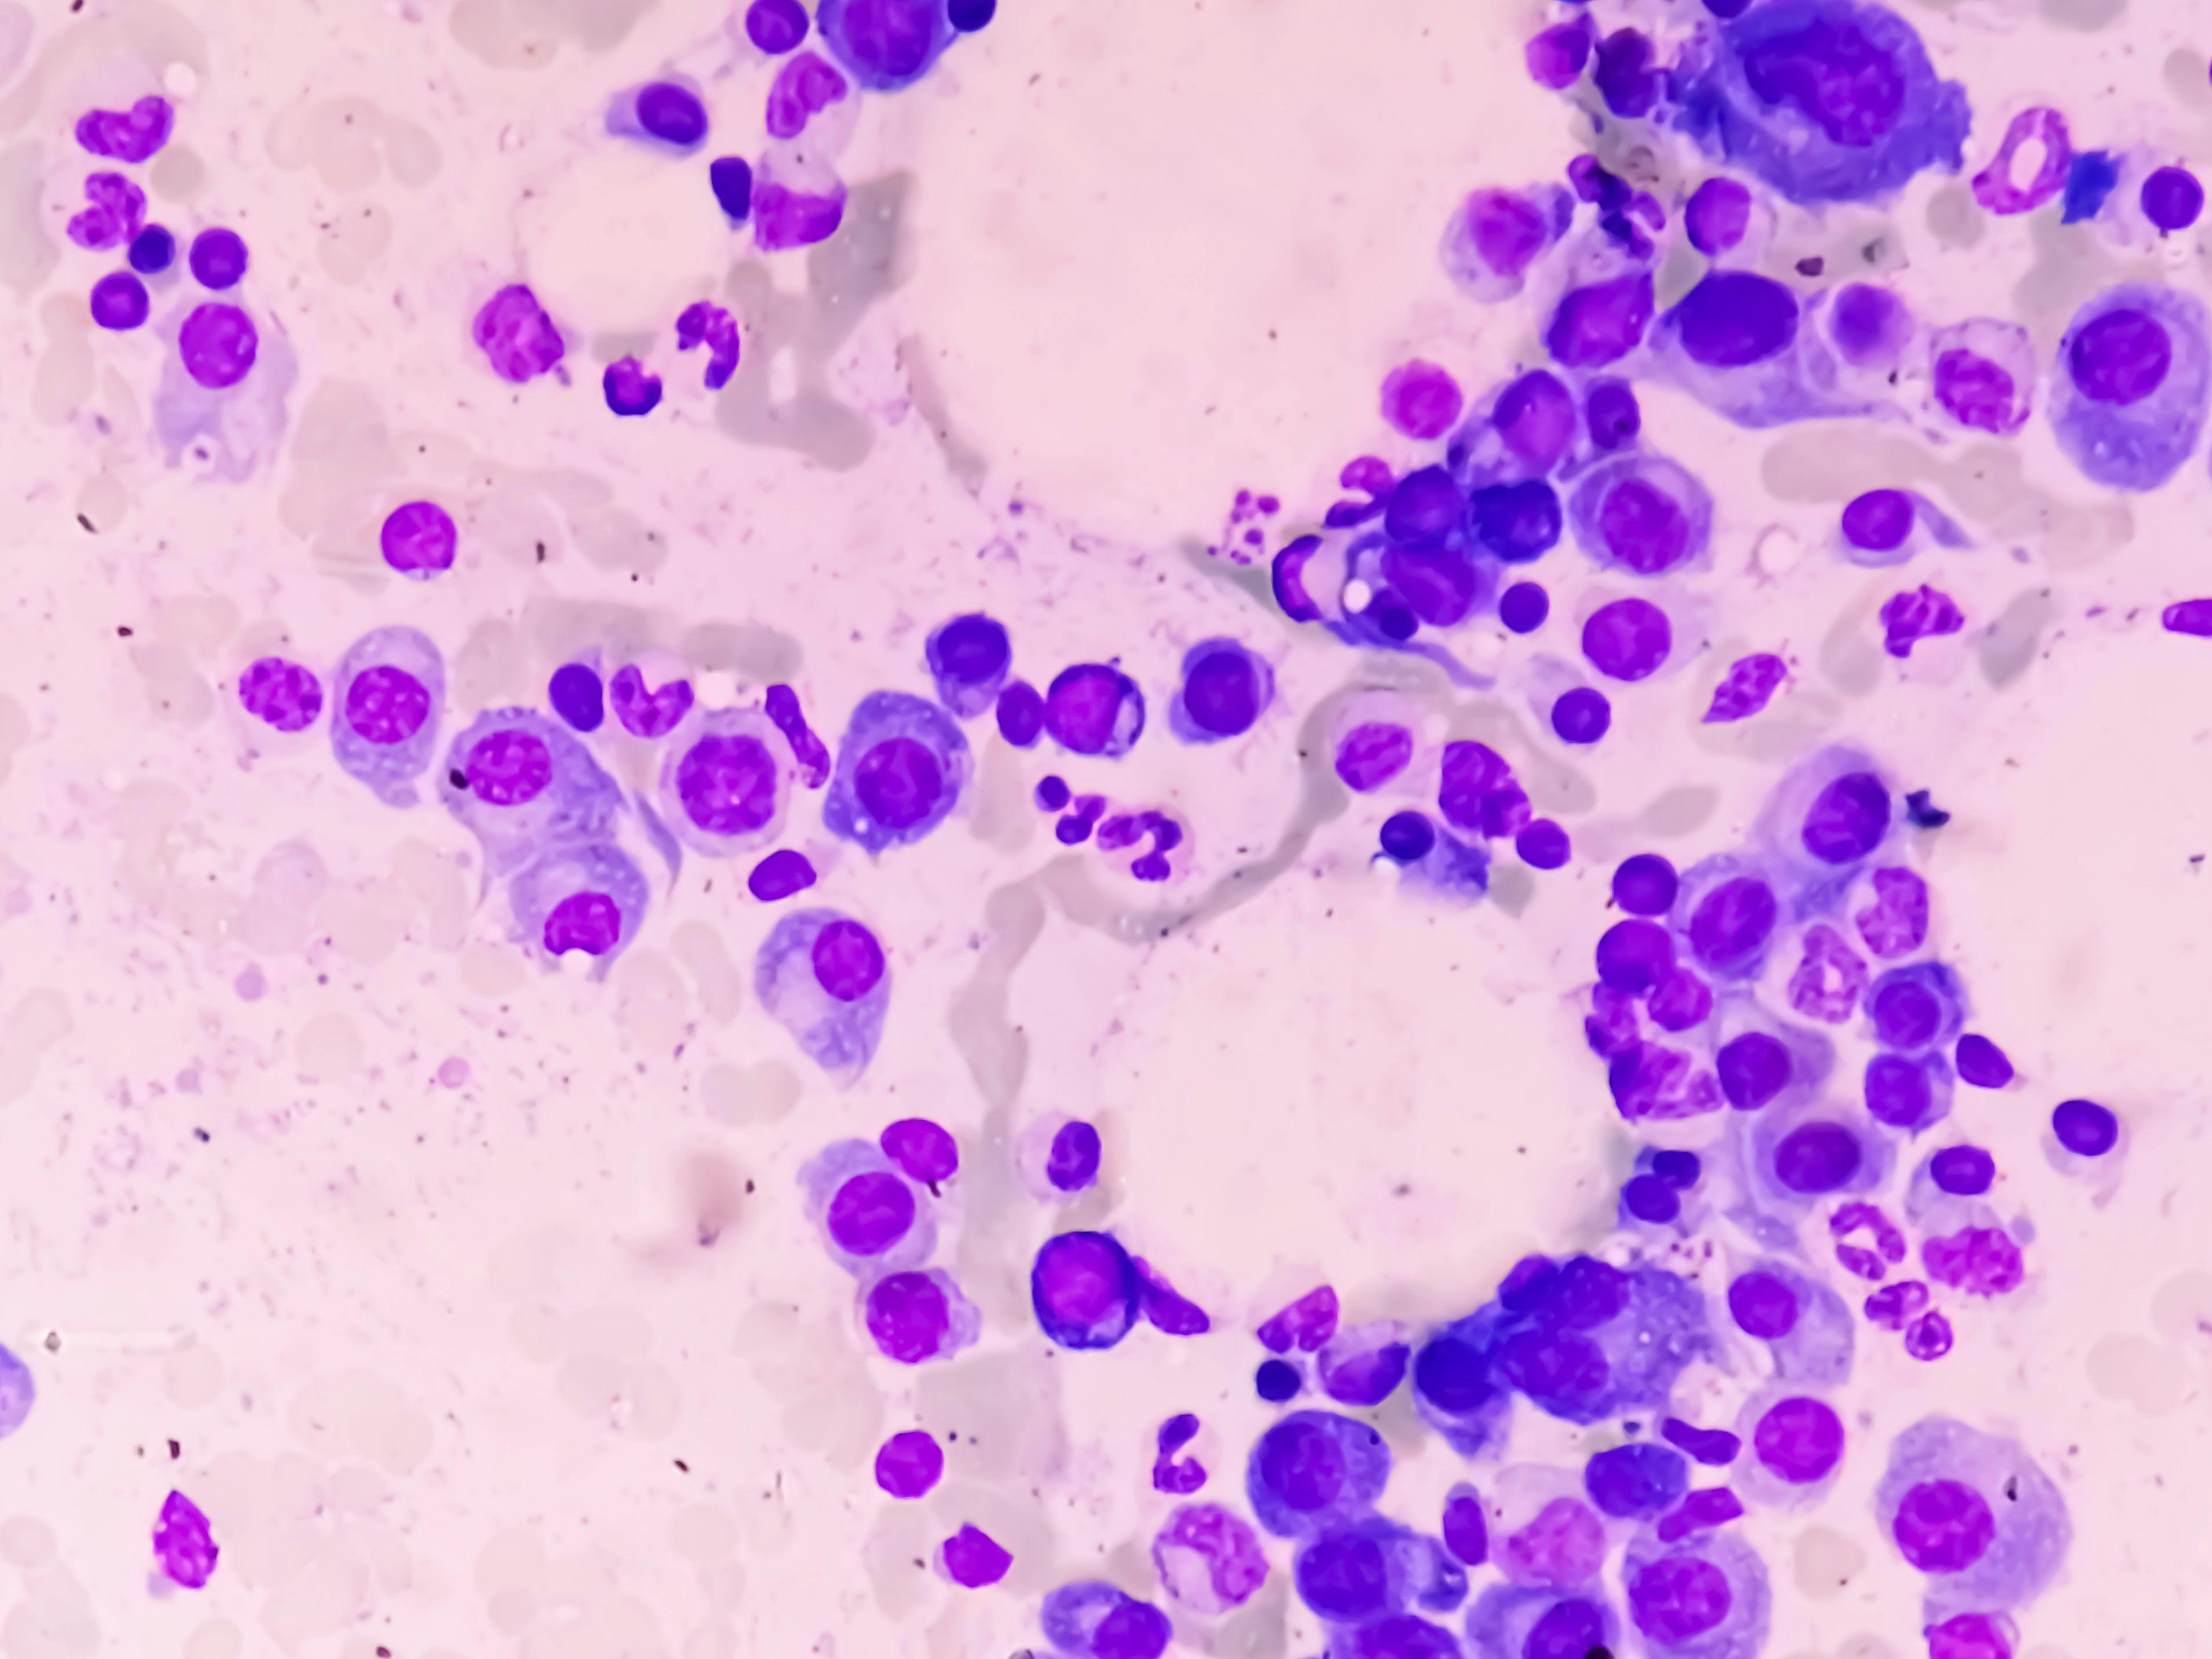 Microscopic view of bone marrow with multiple myeloma